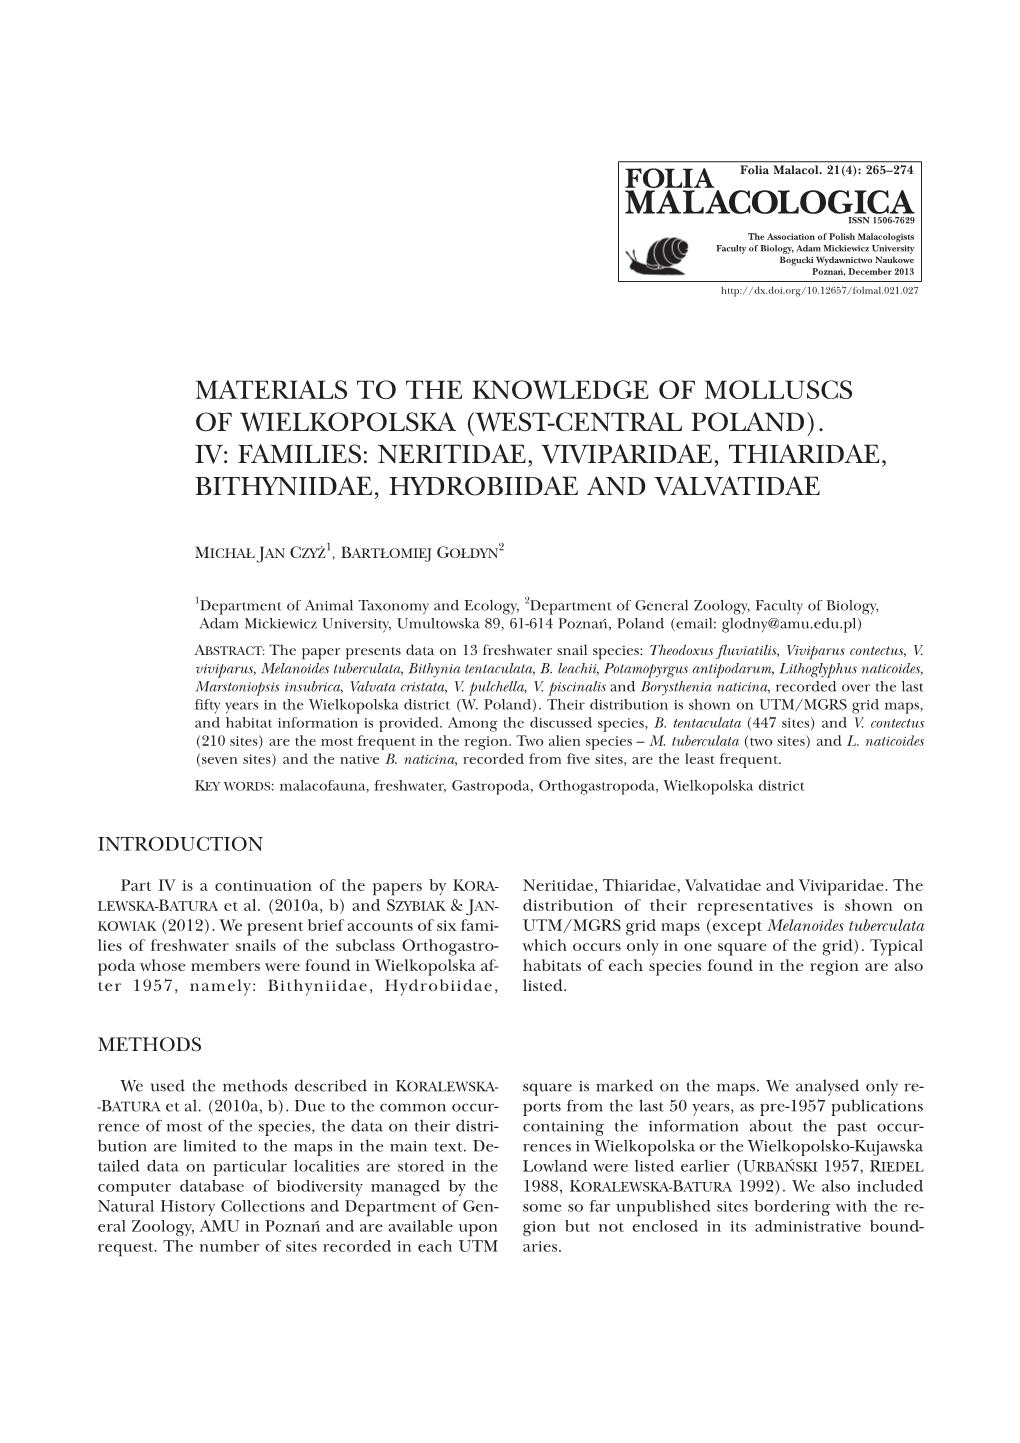 Materials to the Knowledge of Molluscs of Wielkopolska (West-Central Poland)